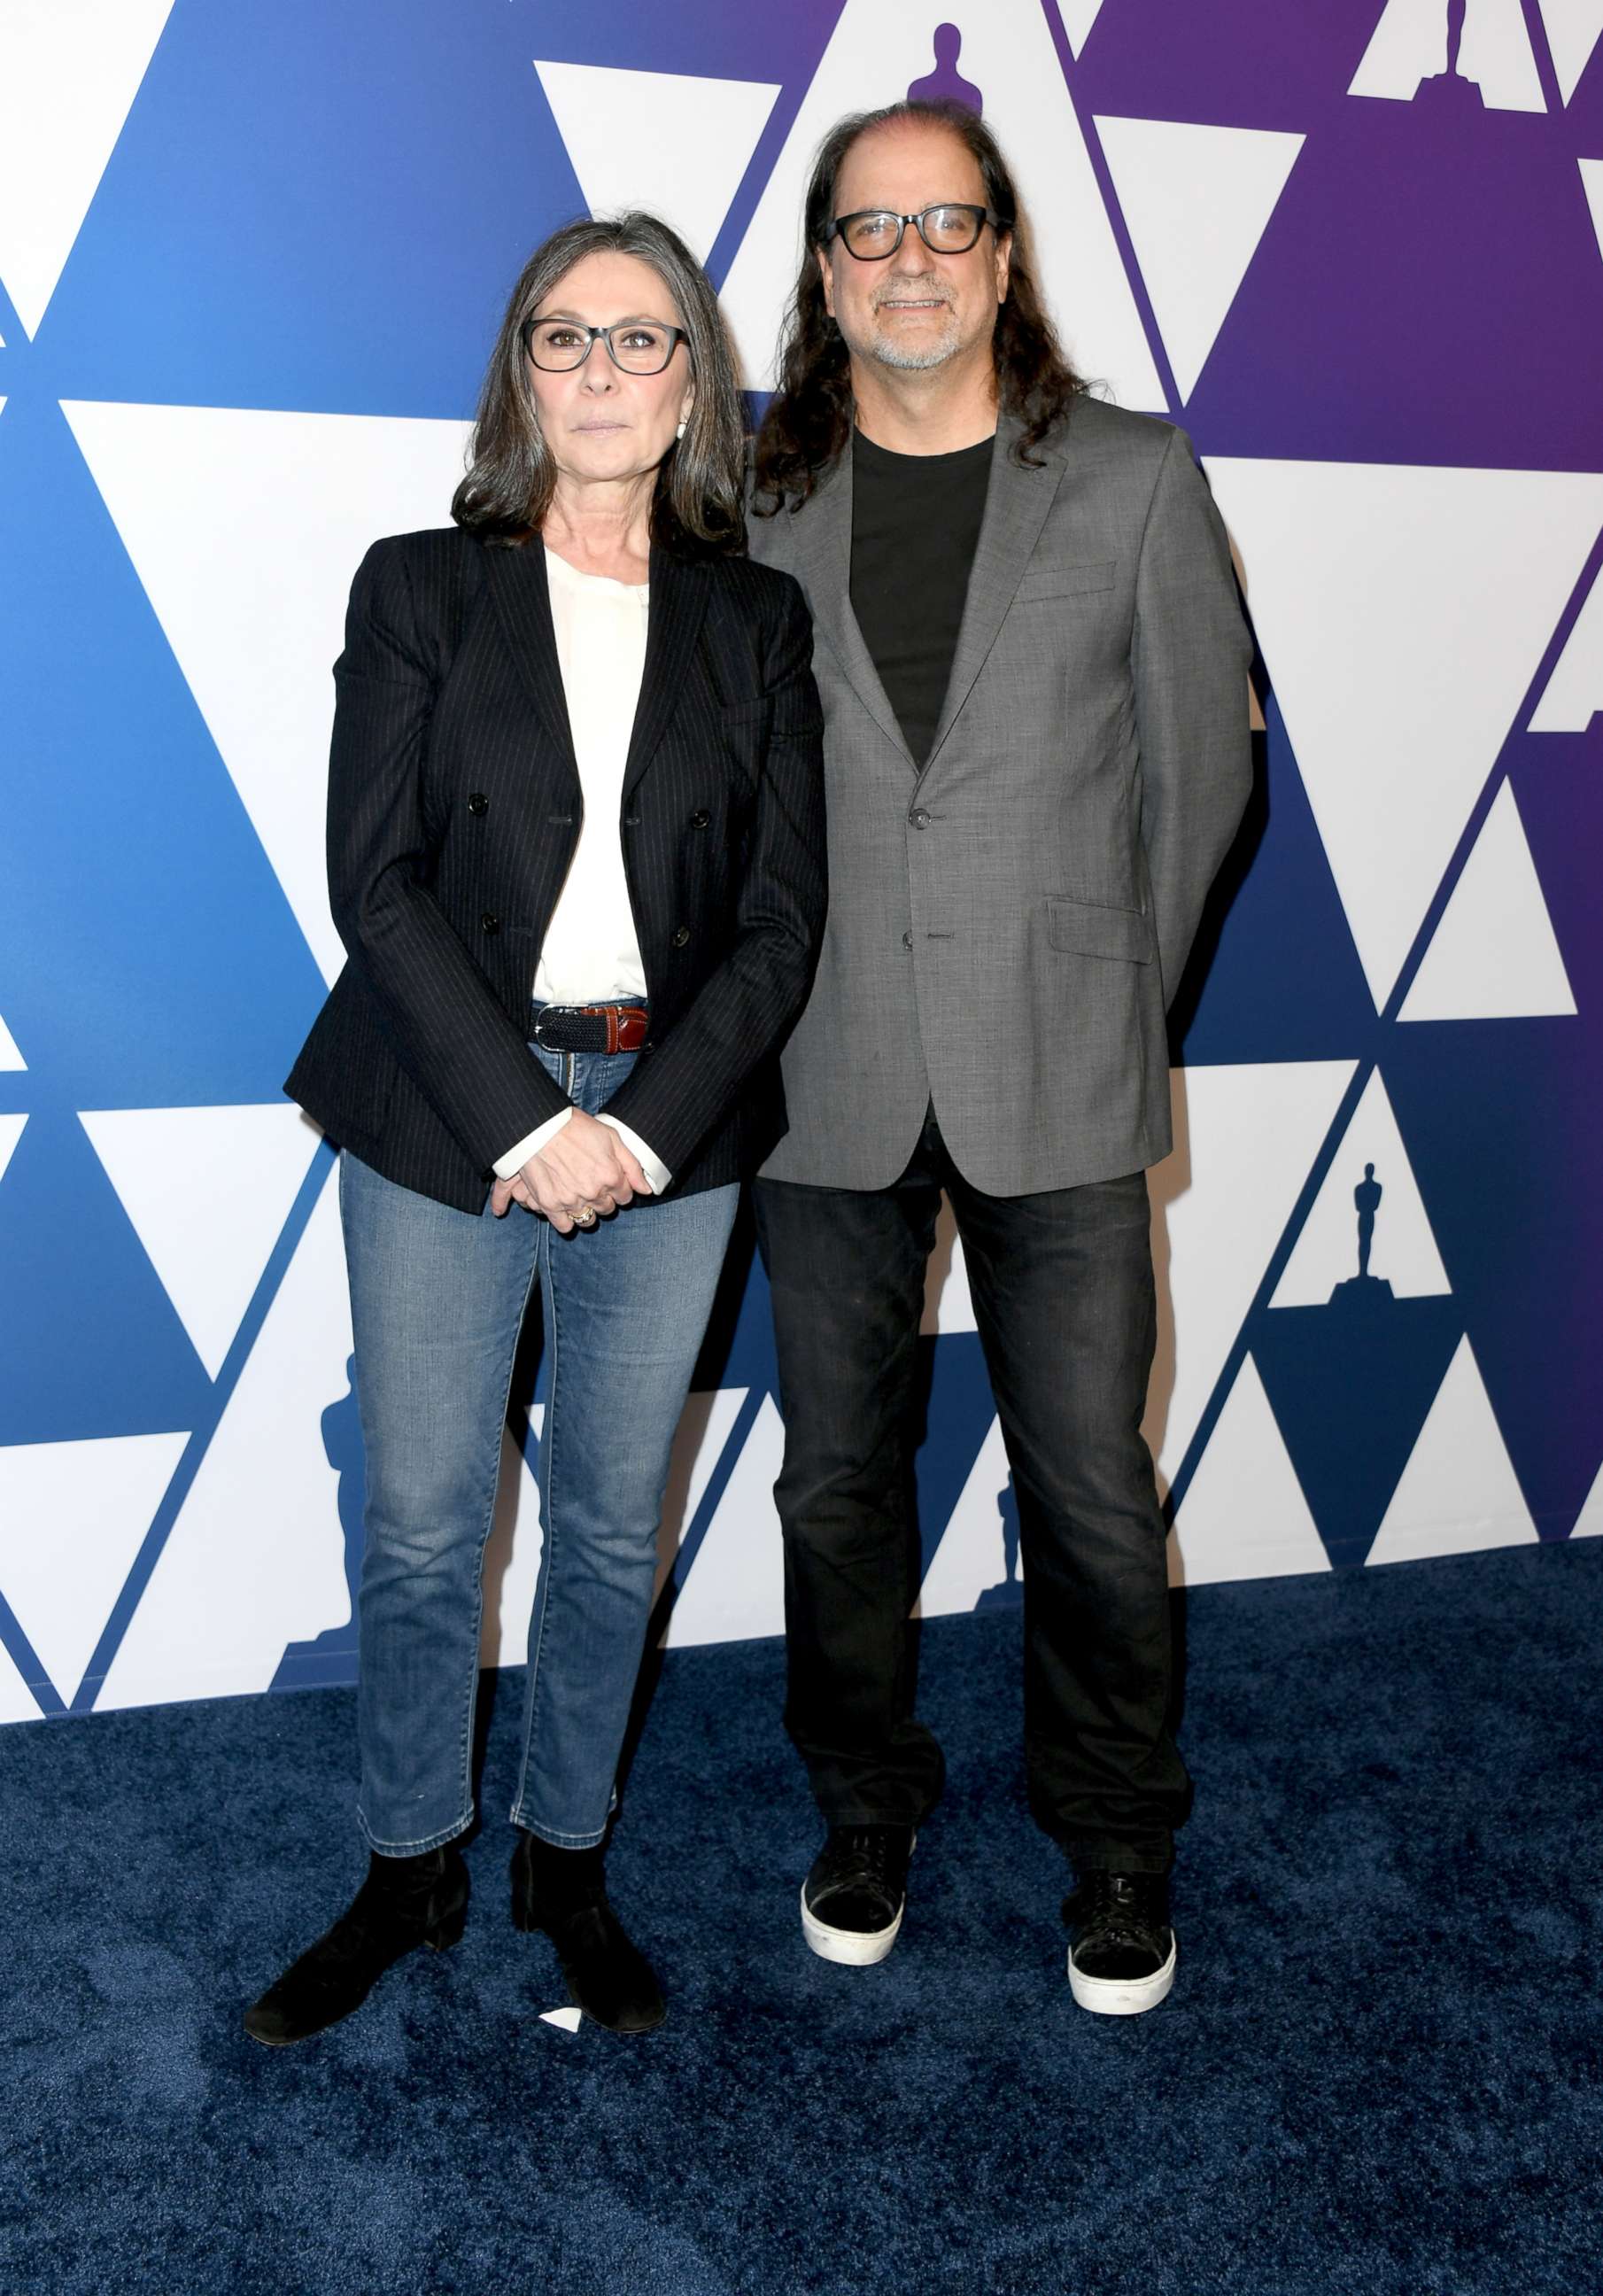 PHOTO: Donna Gigliotti and Glenn Weiss attend the 91st Oscars Nominees Luncheon at The Beverly Hilton Hotel, Feb. 4, 2019, in Beverly Hills, Calif.